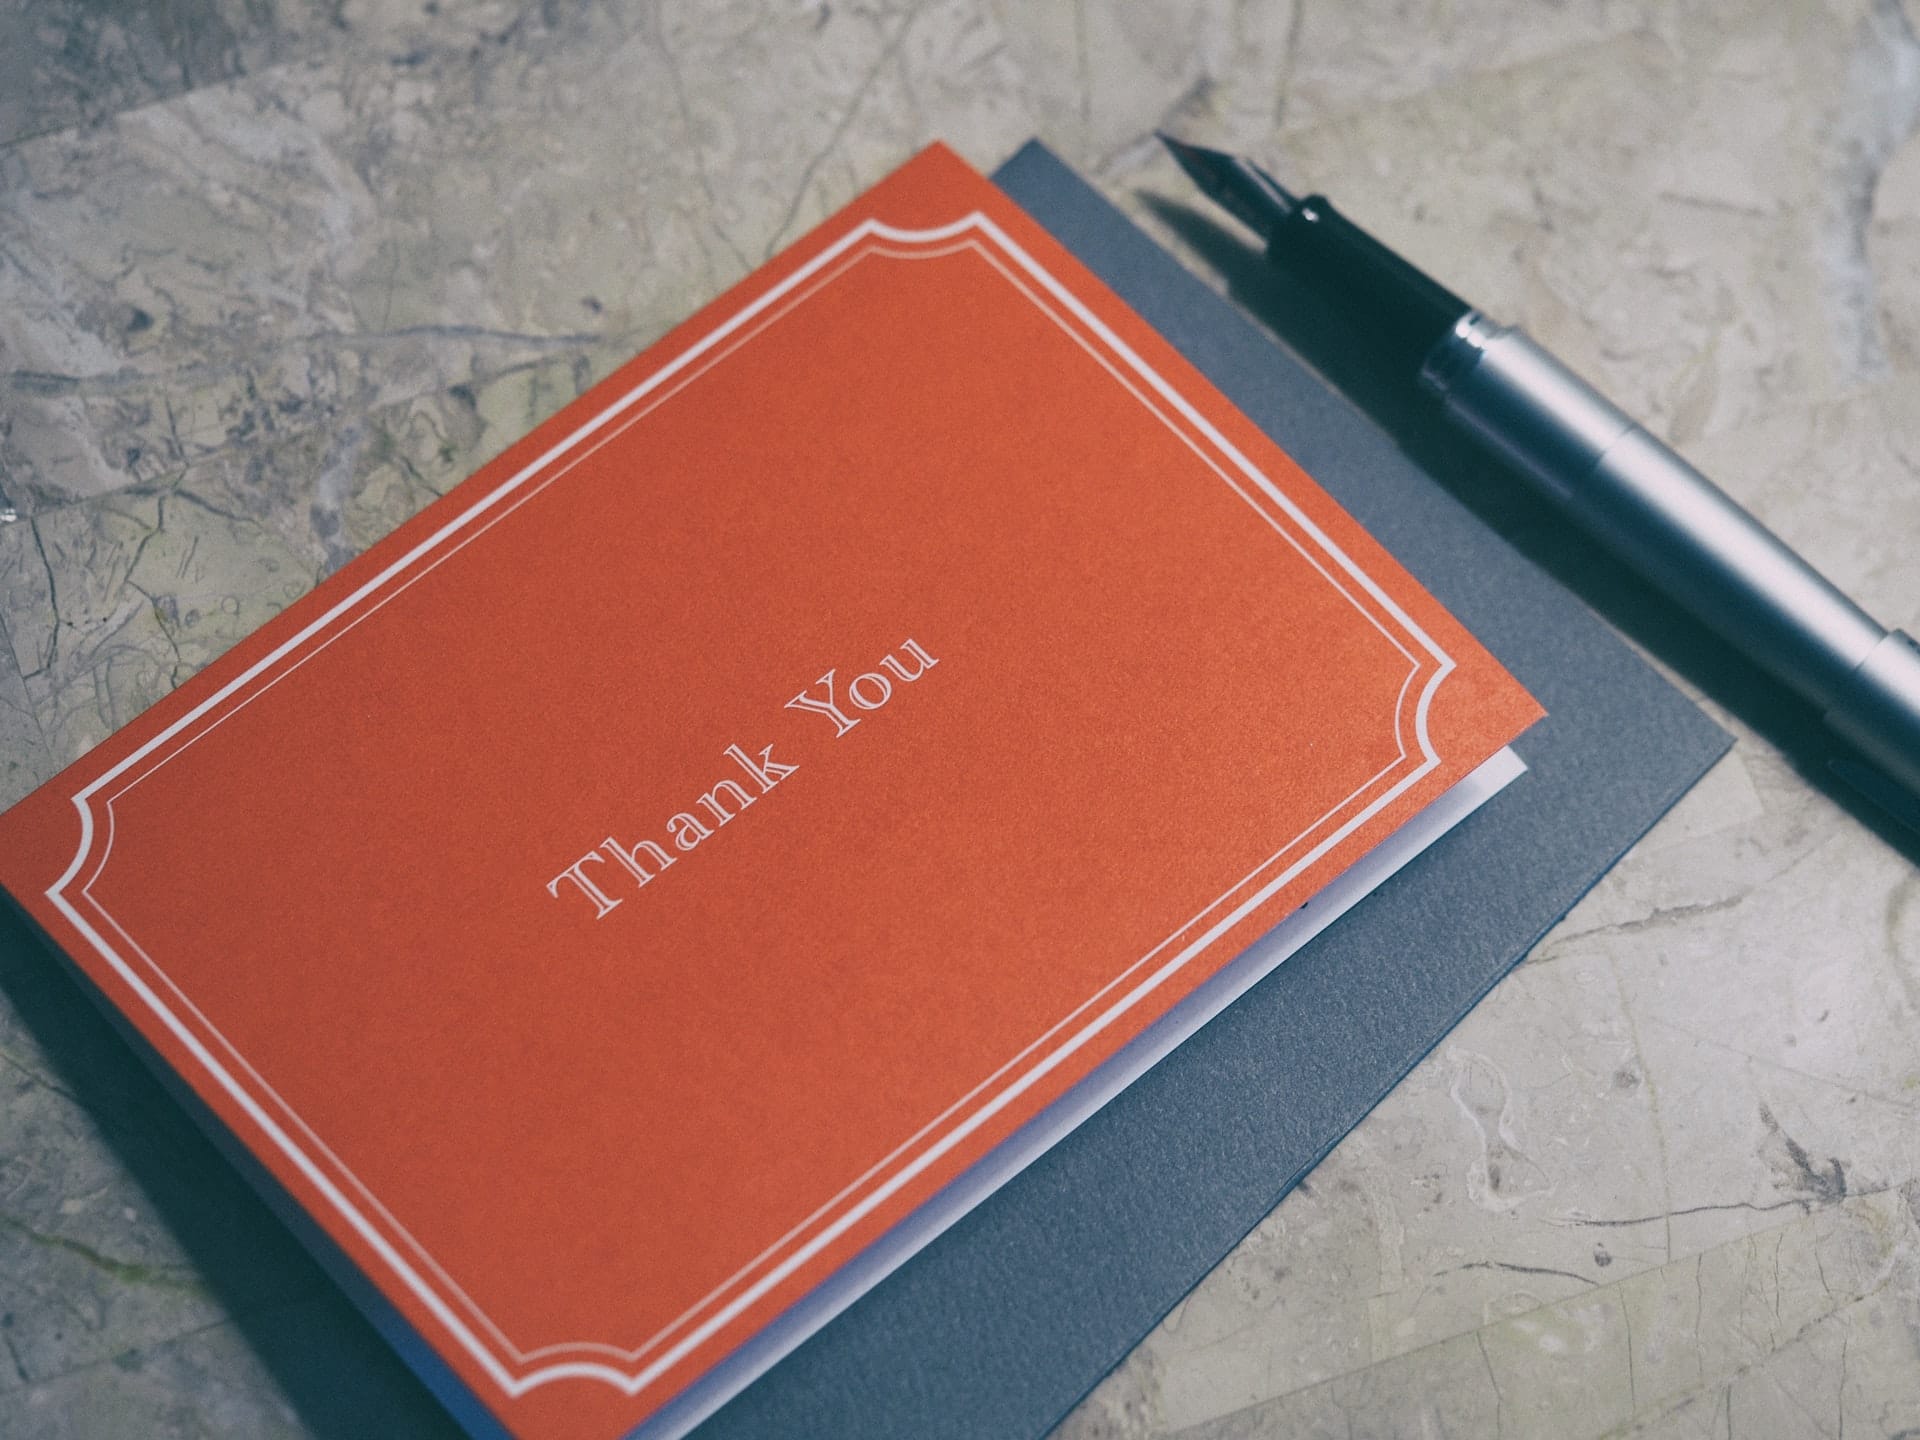 Thank you card, envelope and pen.